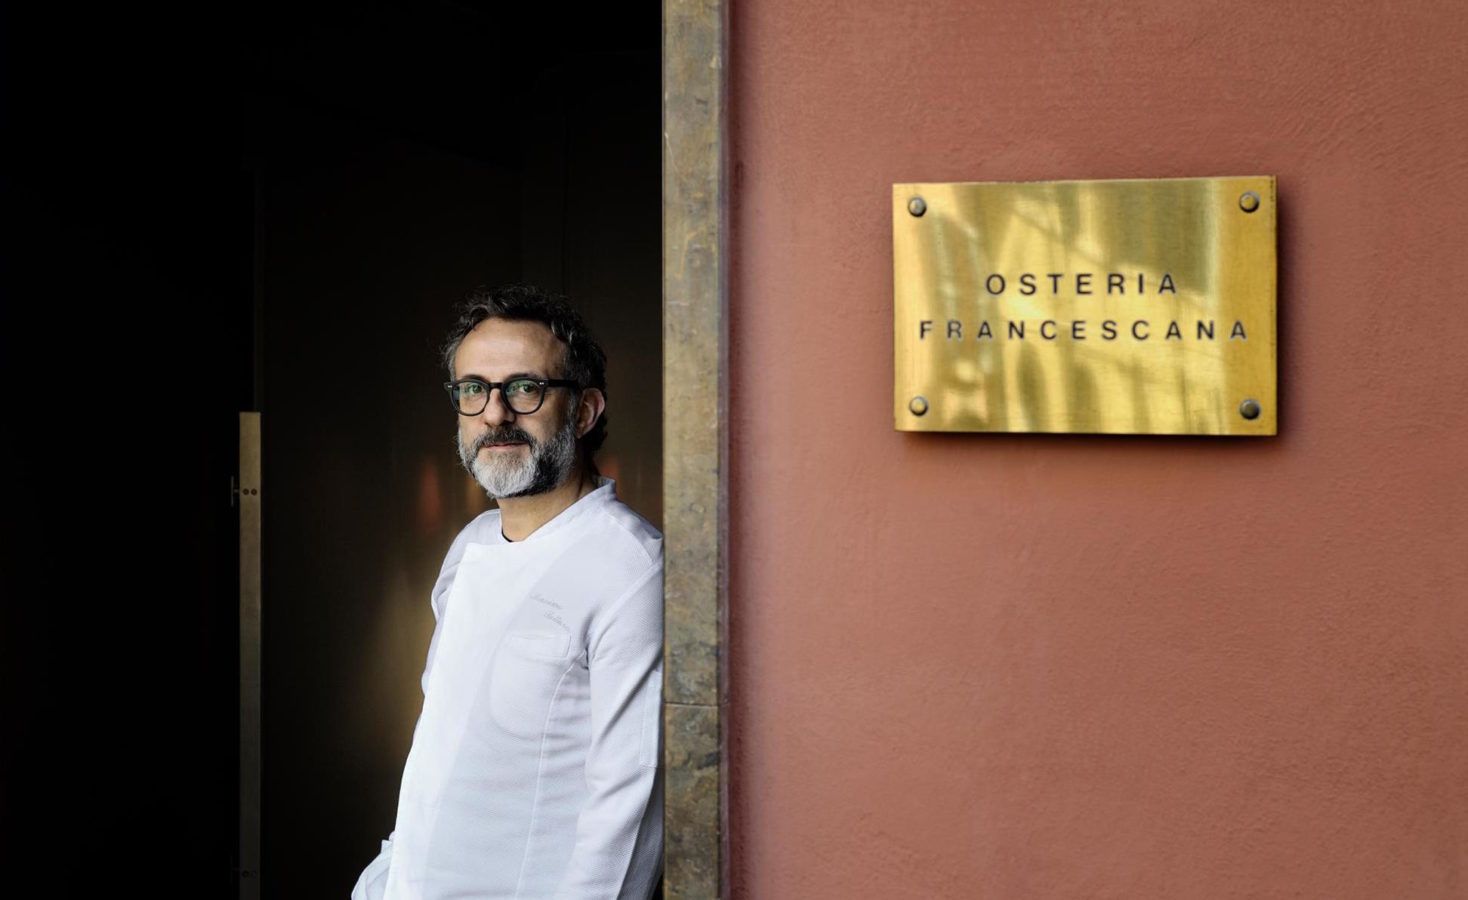 Chef Massimo Bottura teaches cooking at home with ‘Kitchen Quarantine’ series